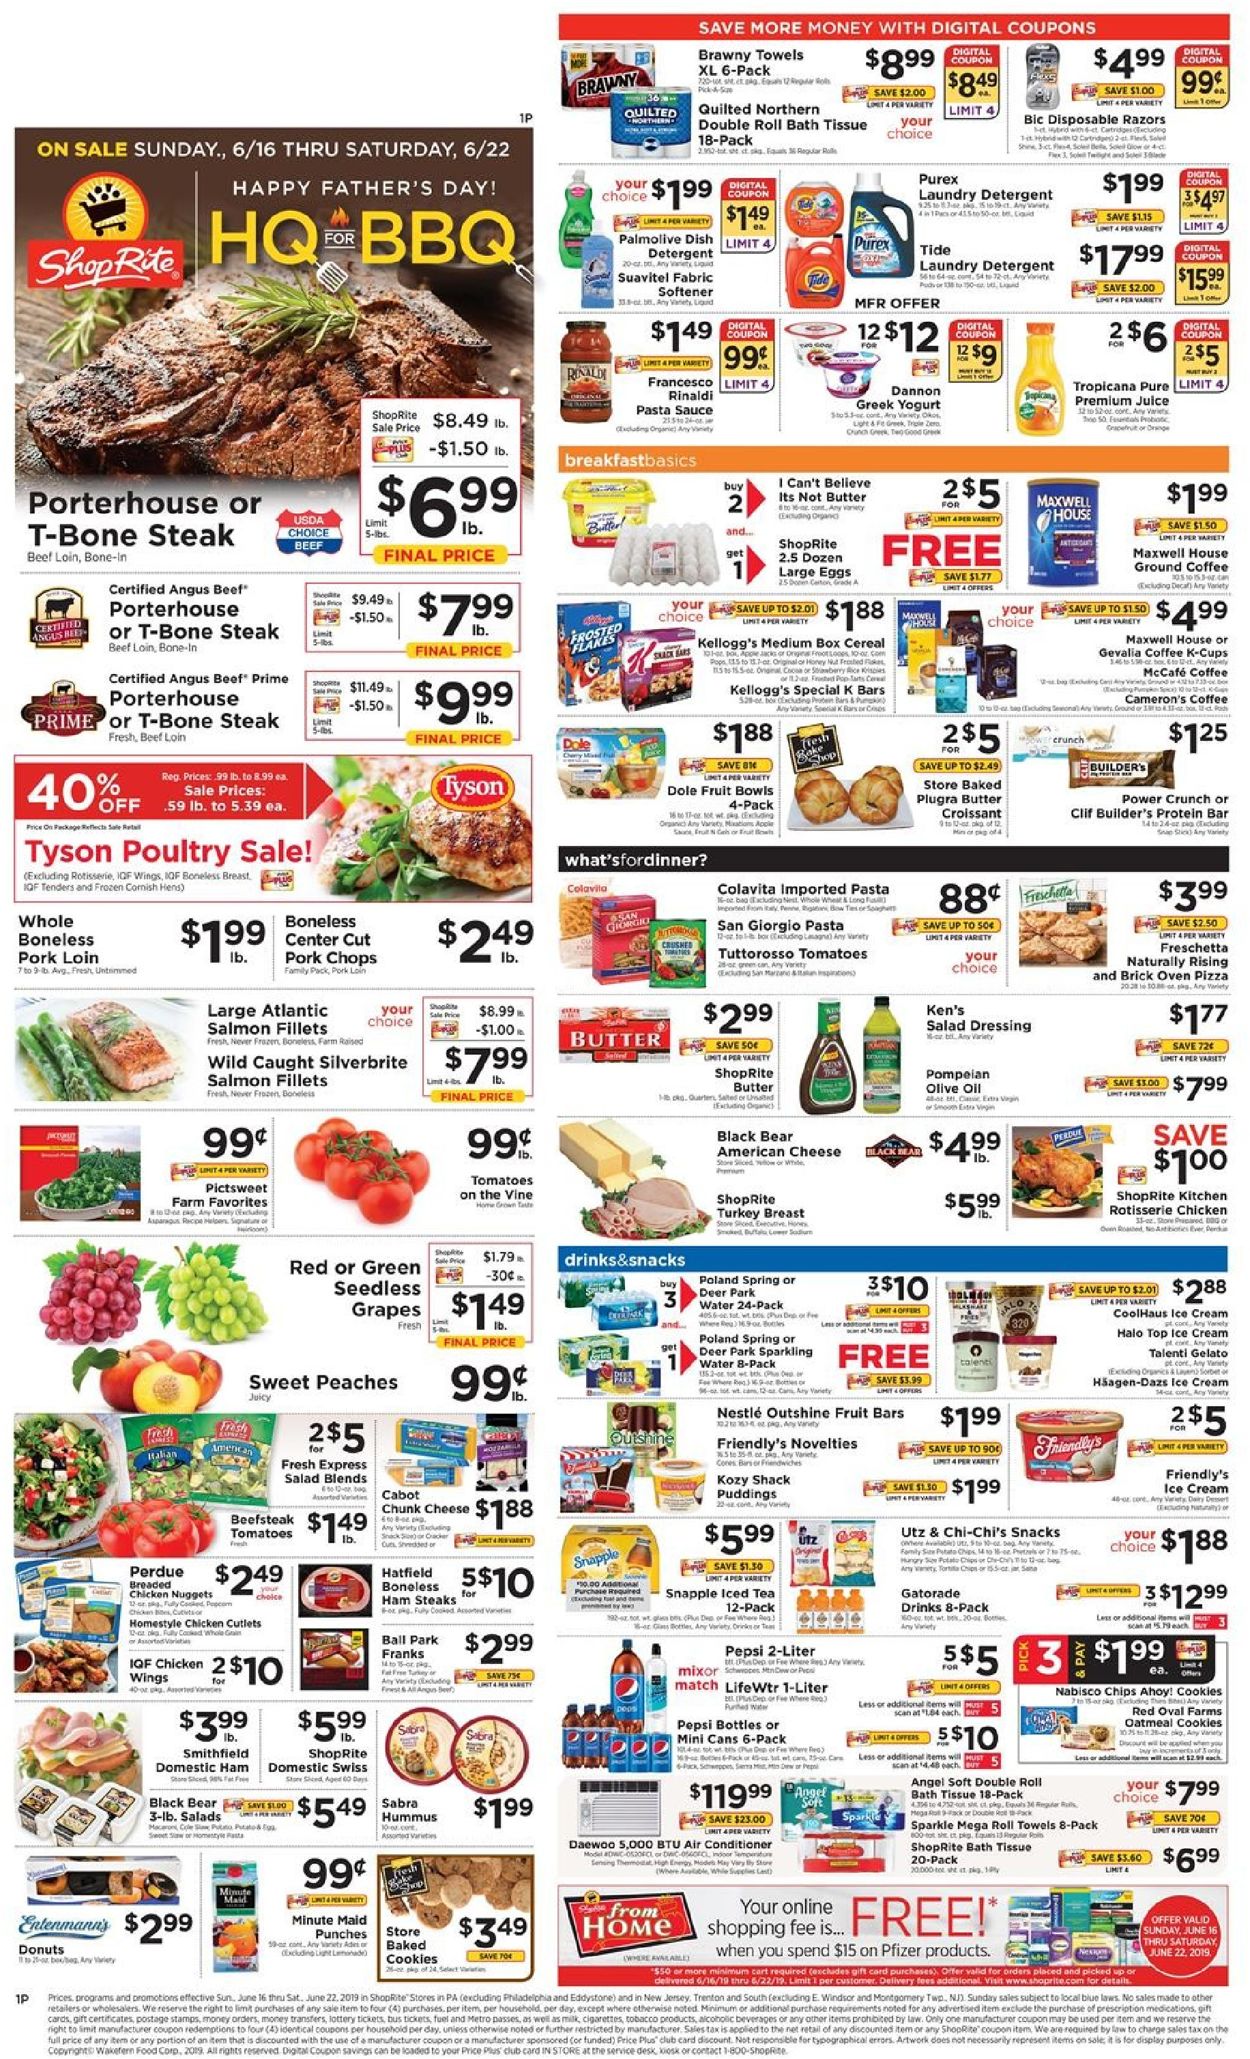 ShopRite Current weekly ad 06/16 - 06/21/2019 - frequent-ads.com